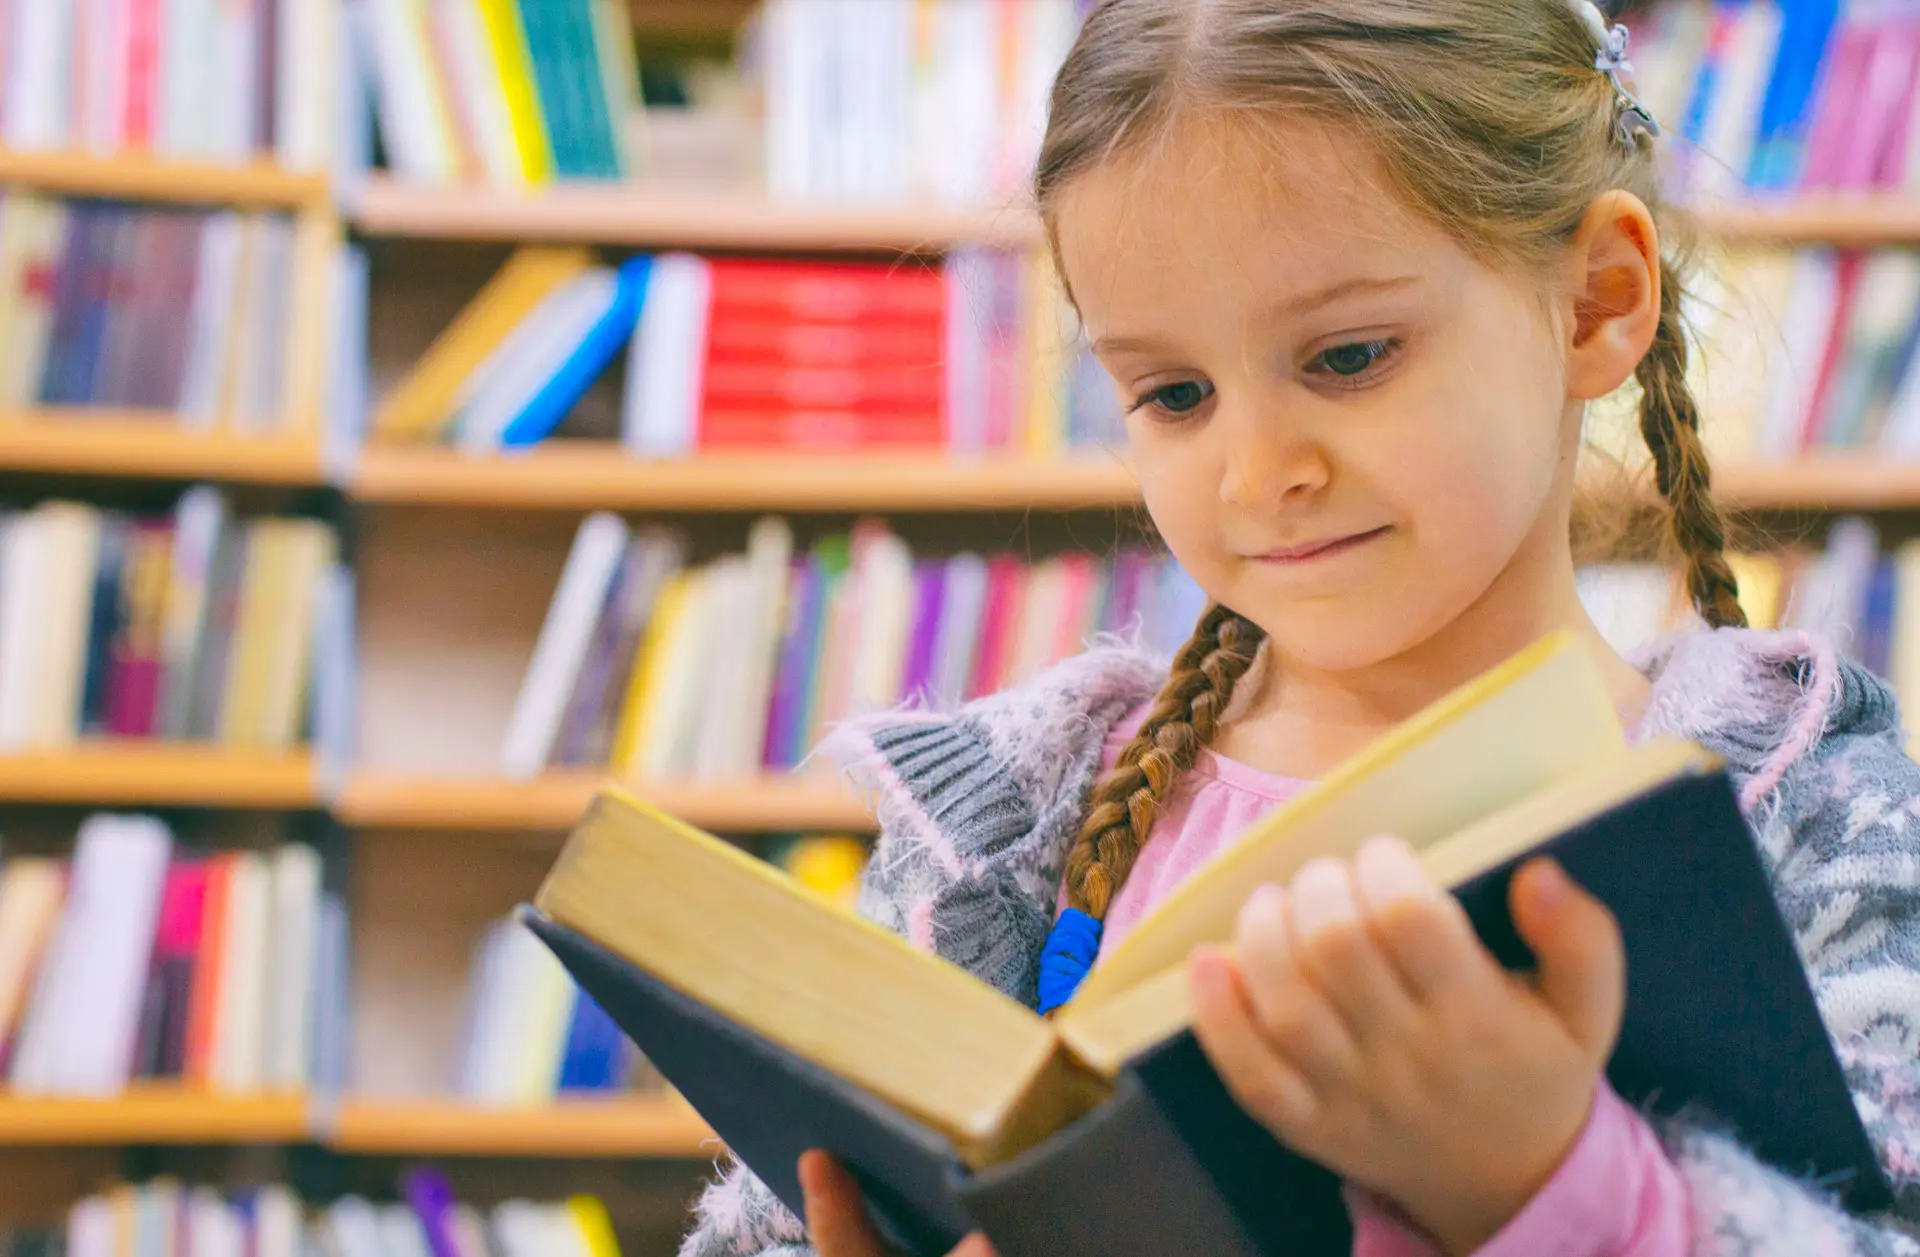 A young girl reading a book at the library.